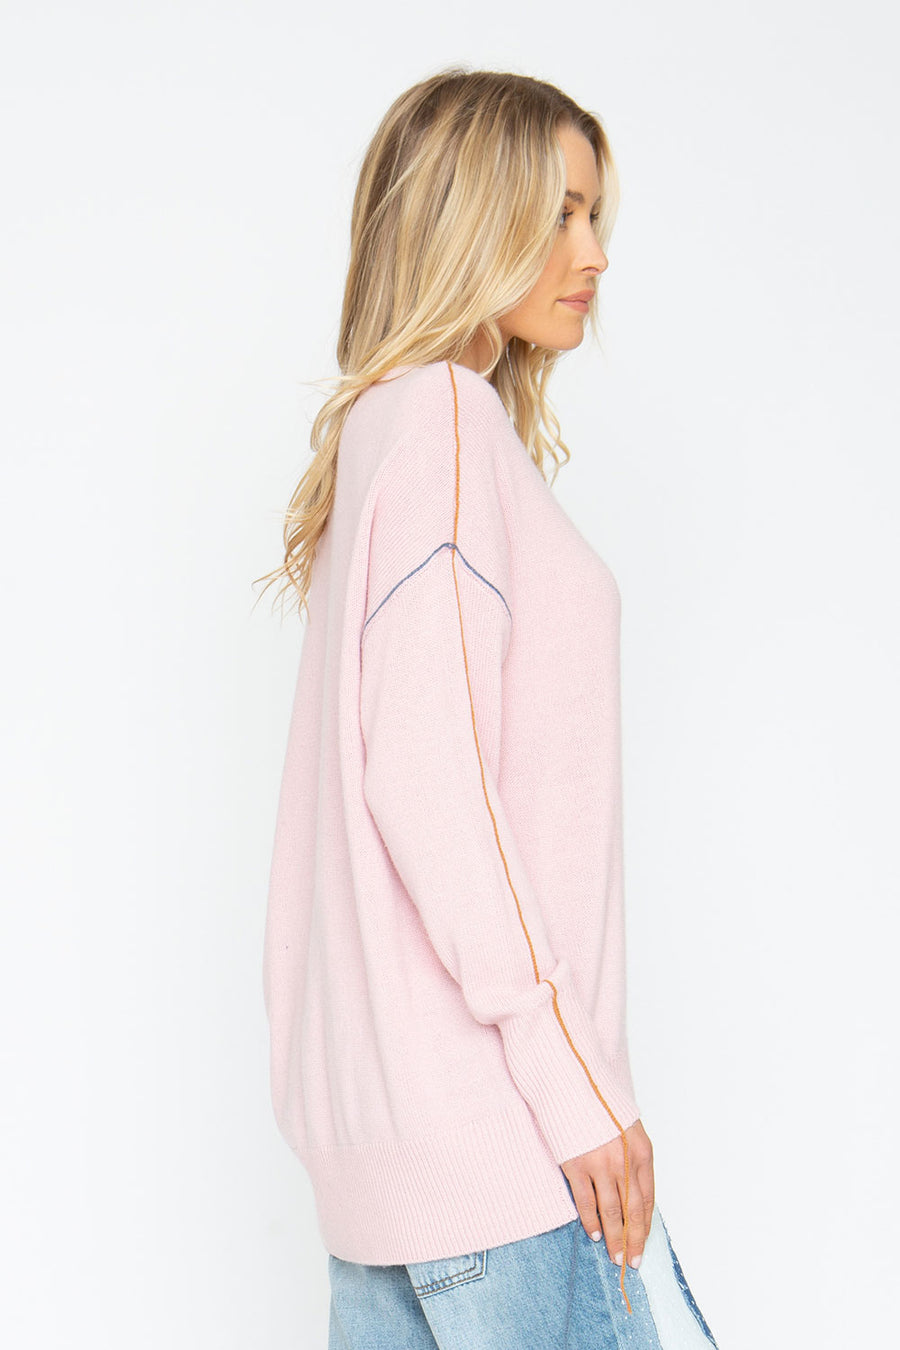 Bubble Sweater - Powder Pink Womens chaserbrand